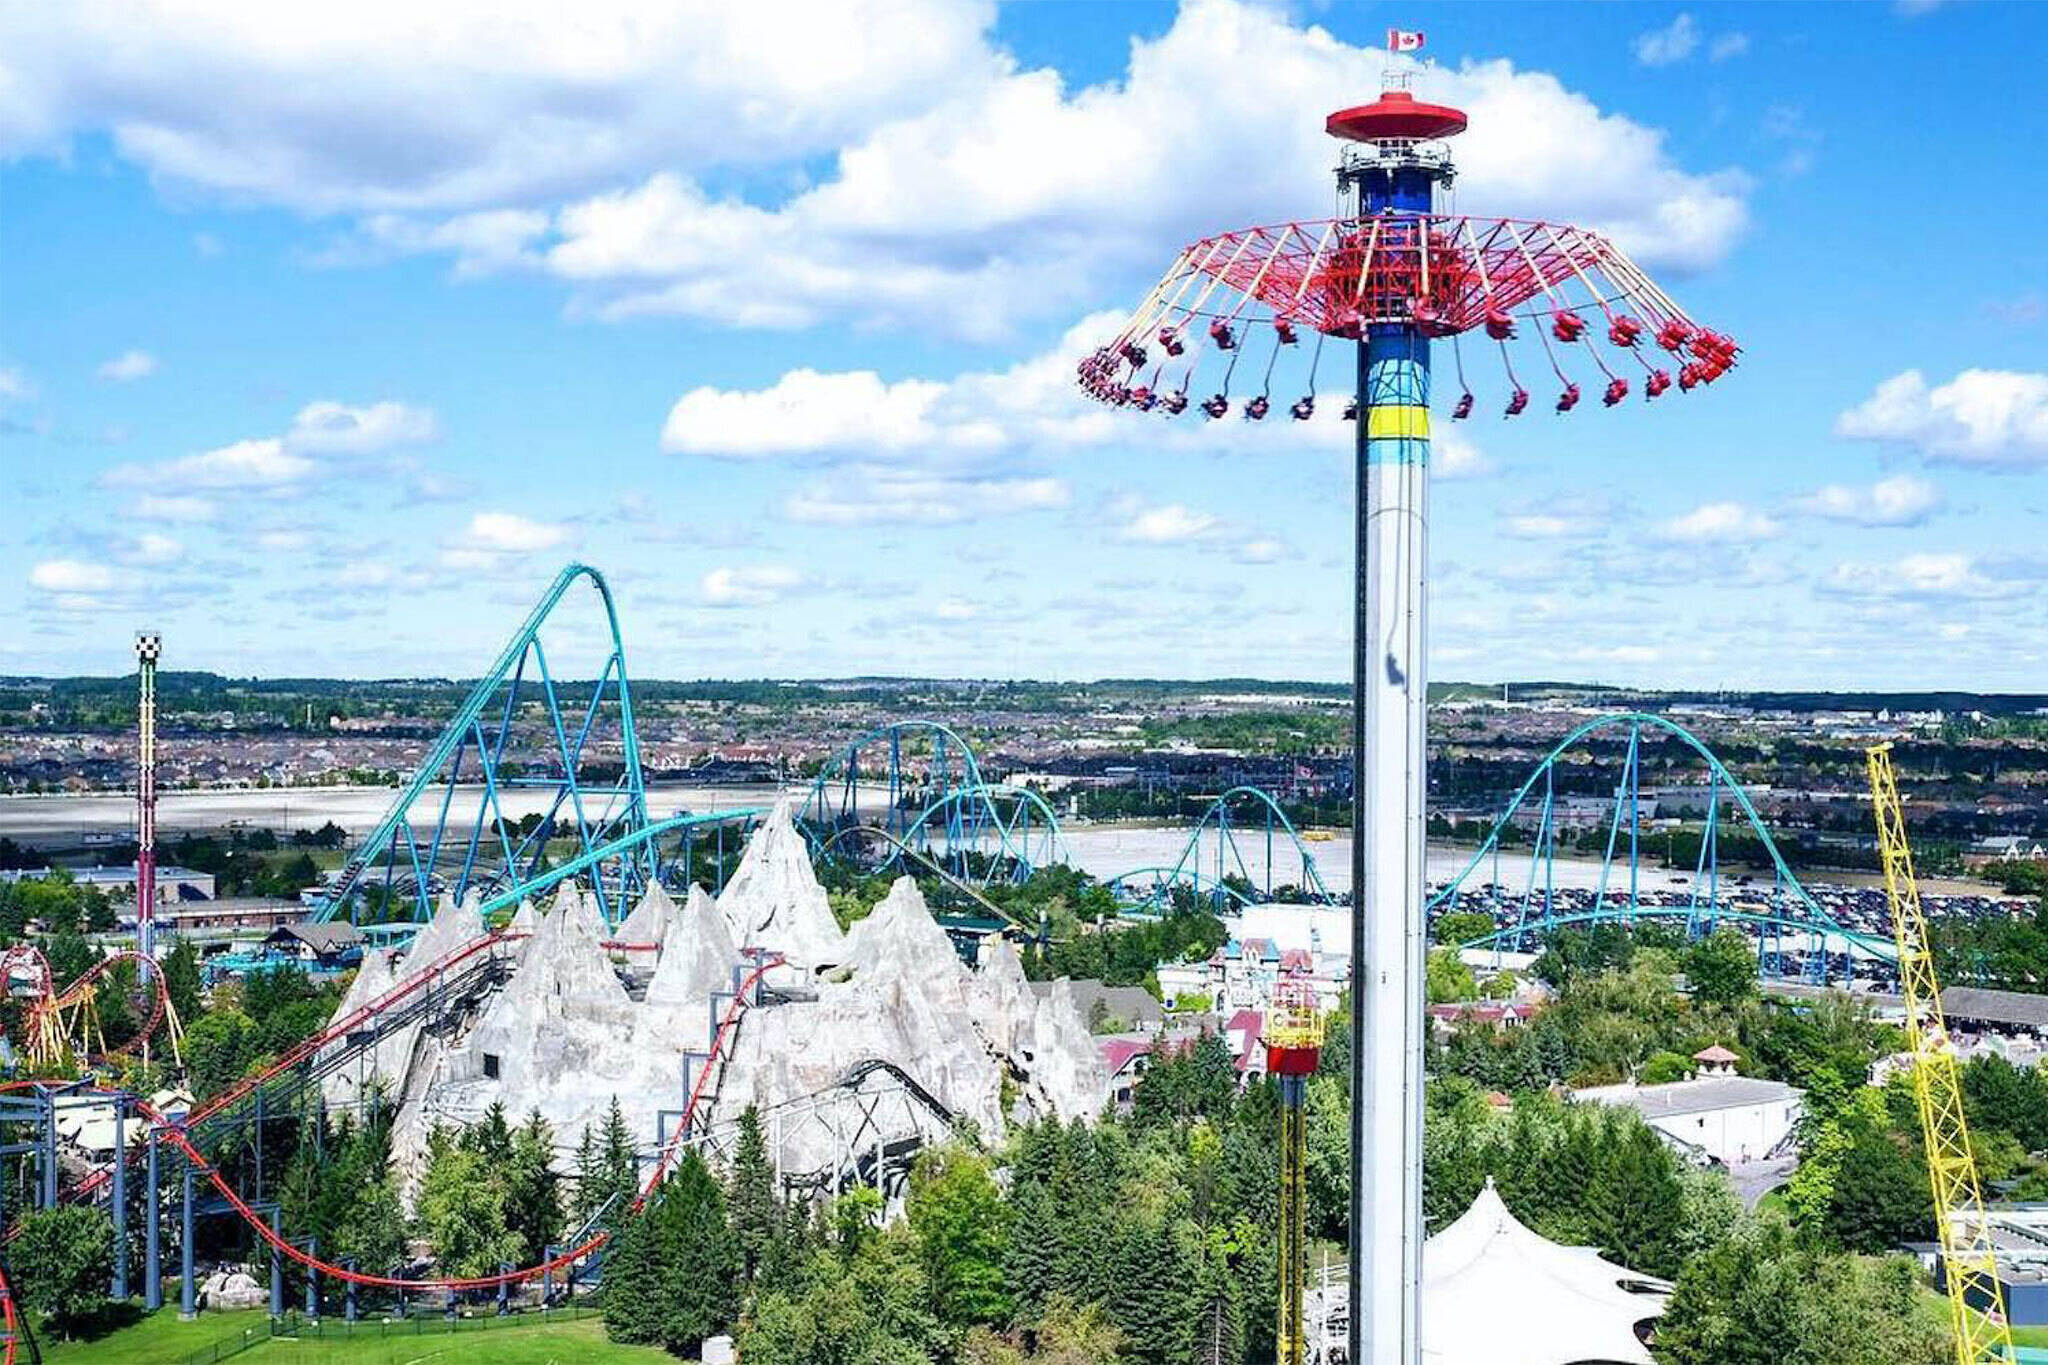 Canada's Wonderland opens for the season next month and here's what's